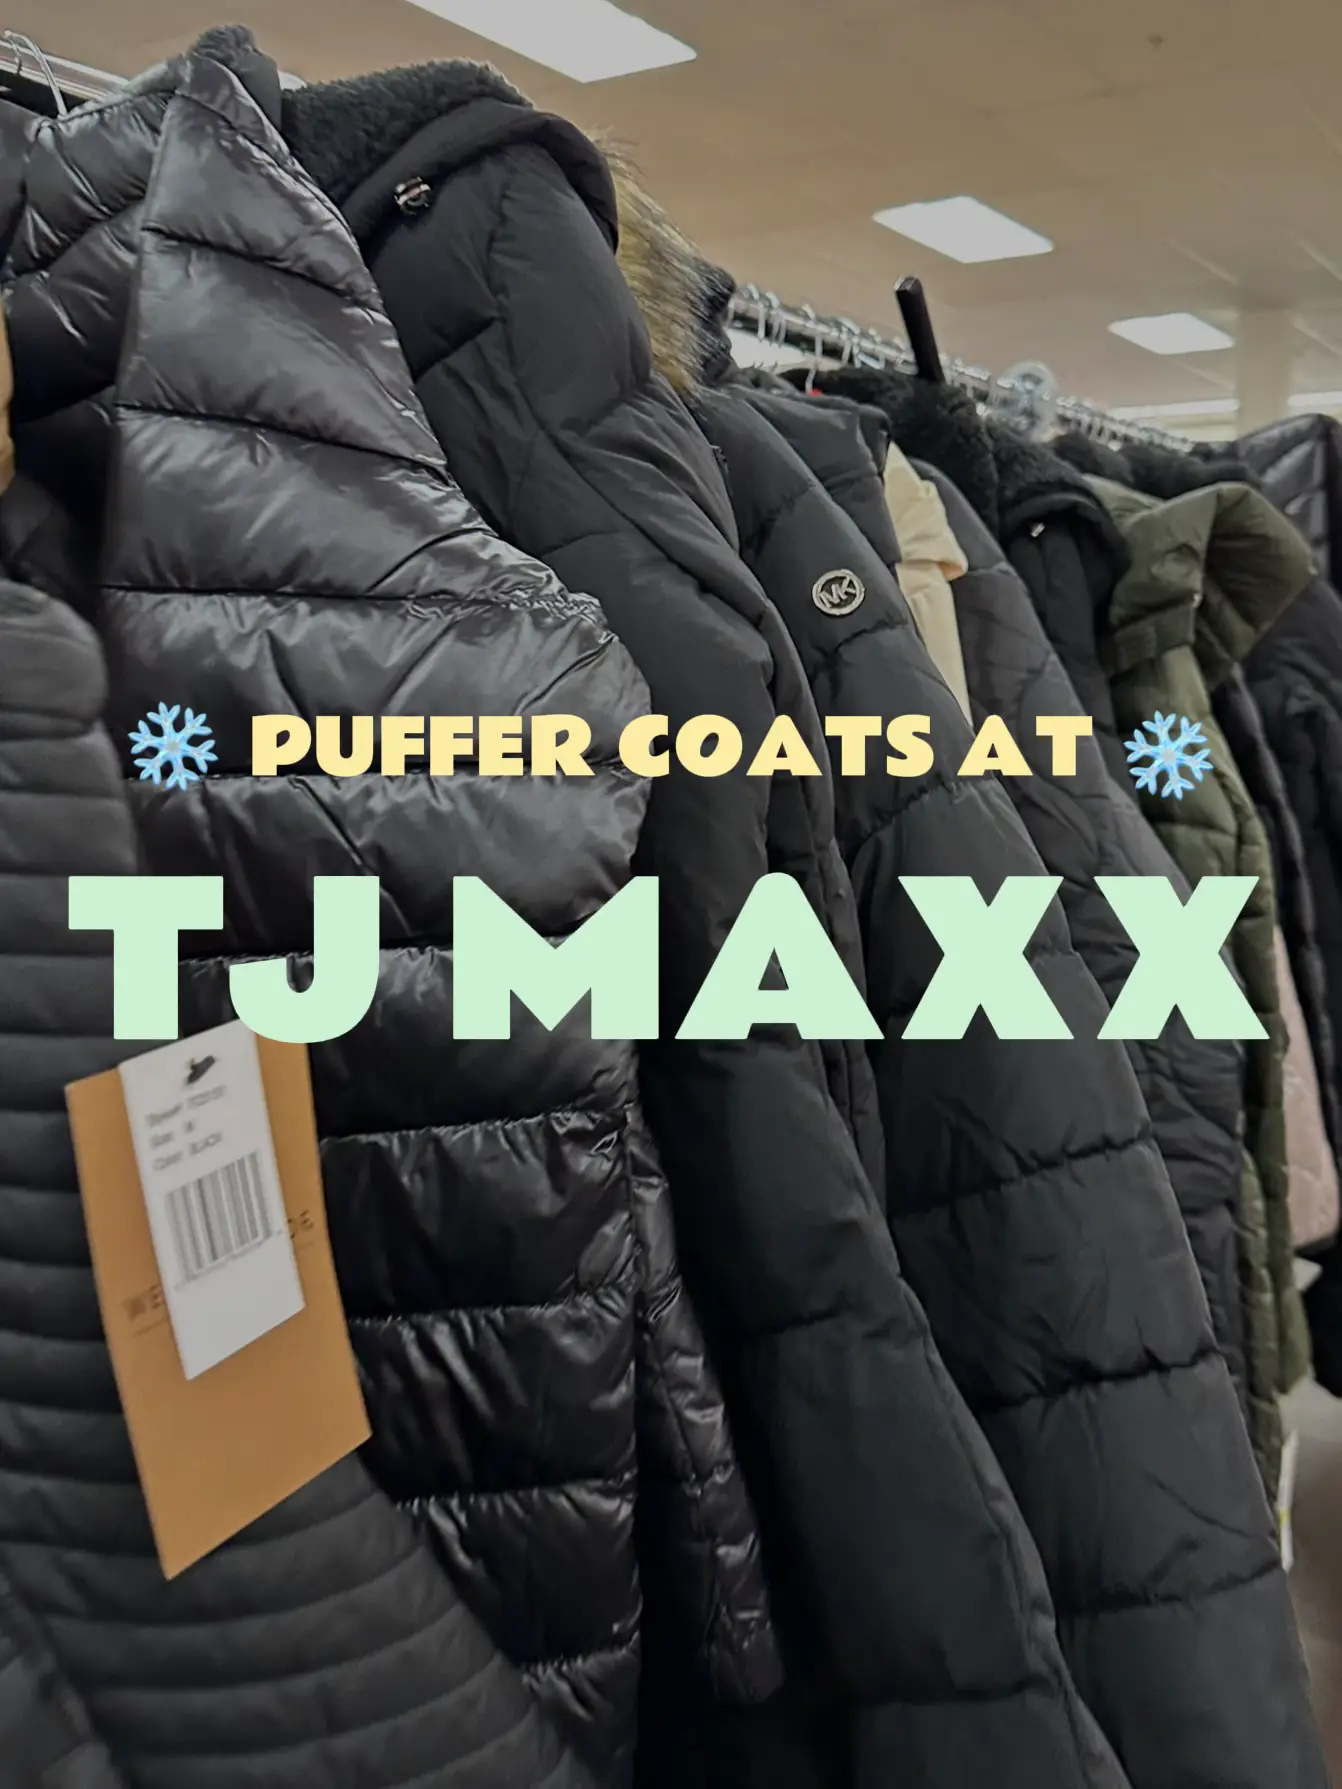  A collection of puffer coats in a store.